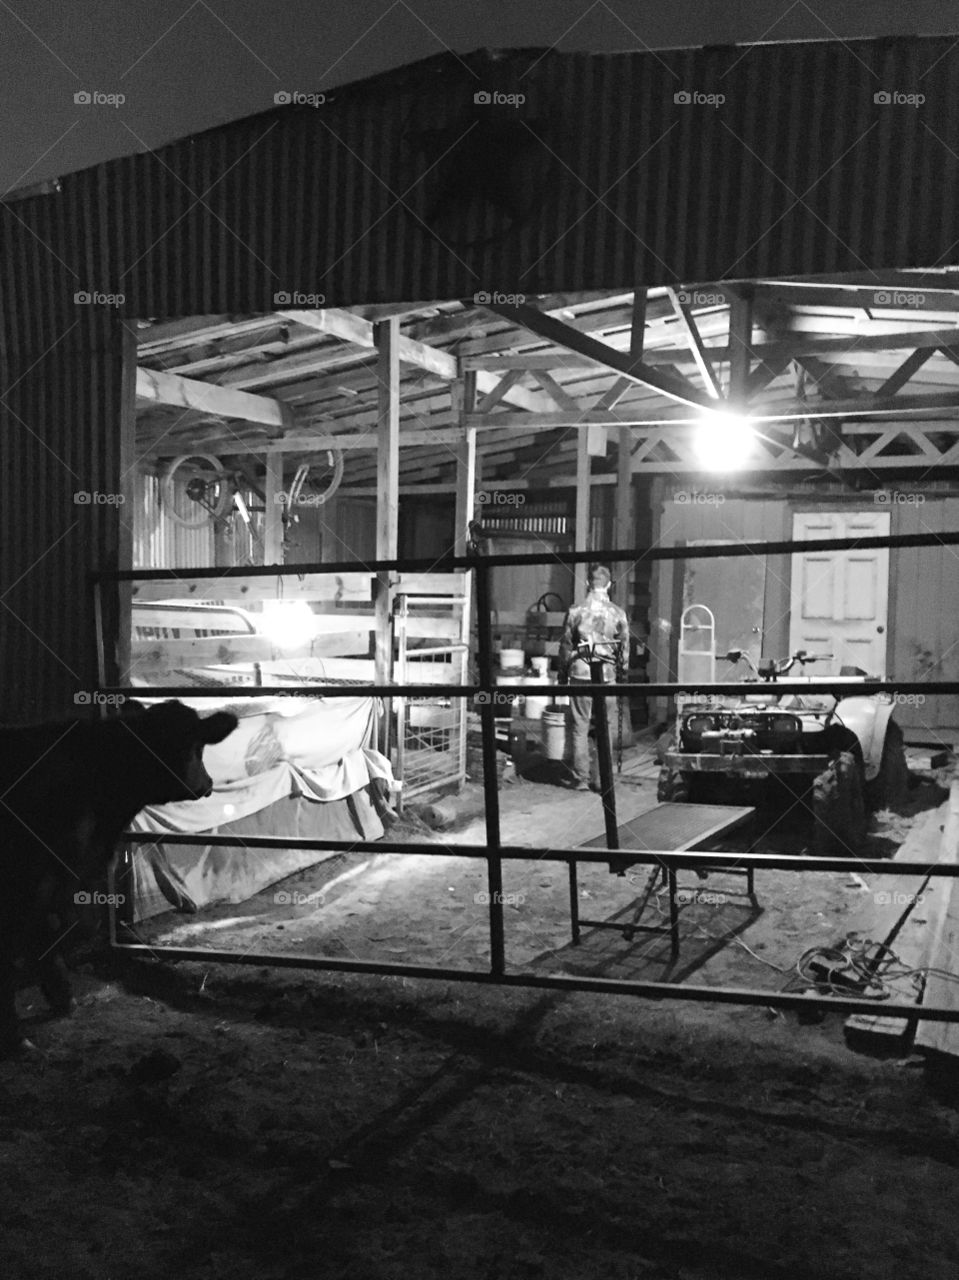 Barn chores at night time. 
Nosey cow too. 